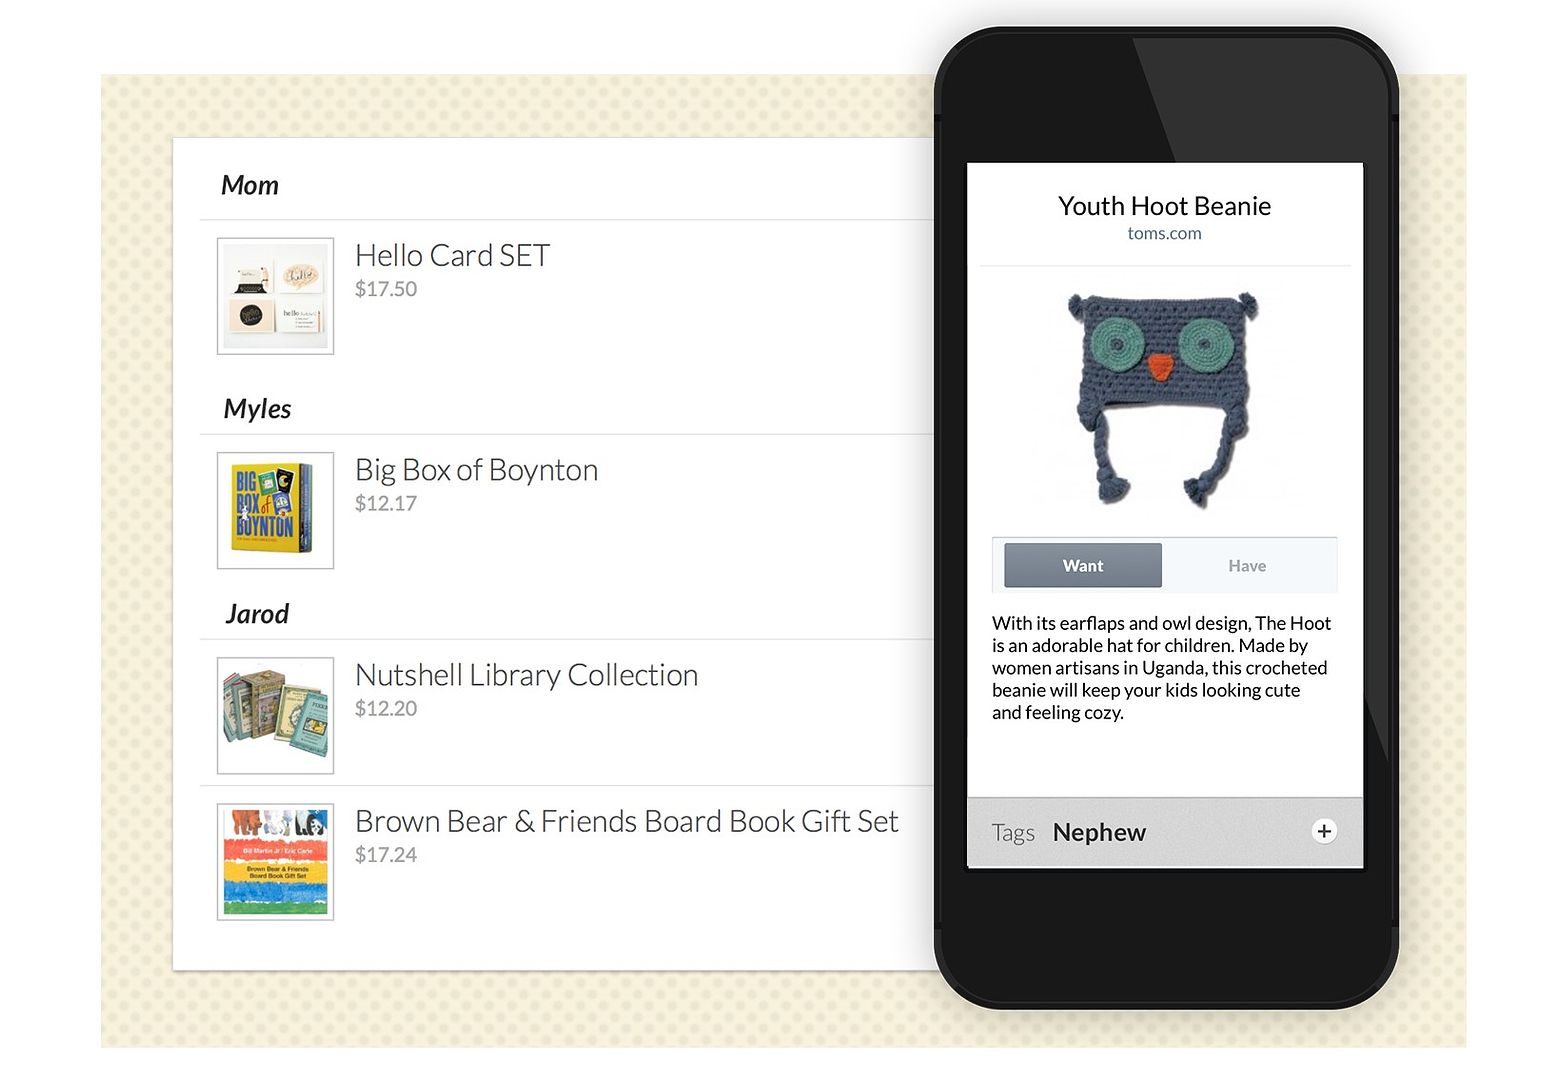 Springpad Mobile App featuring Cool Mom Picks Holiday Shopping Planner